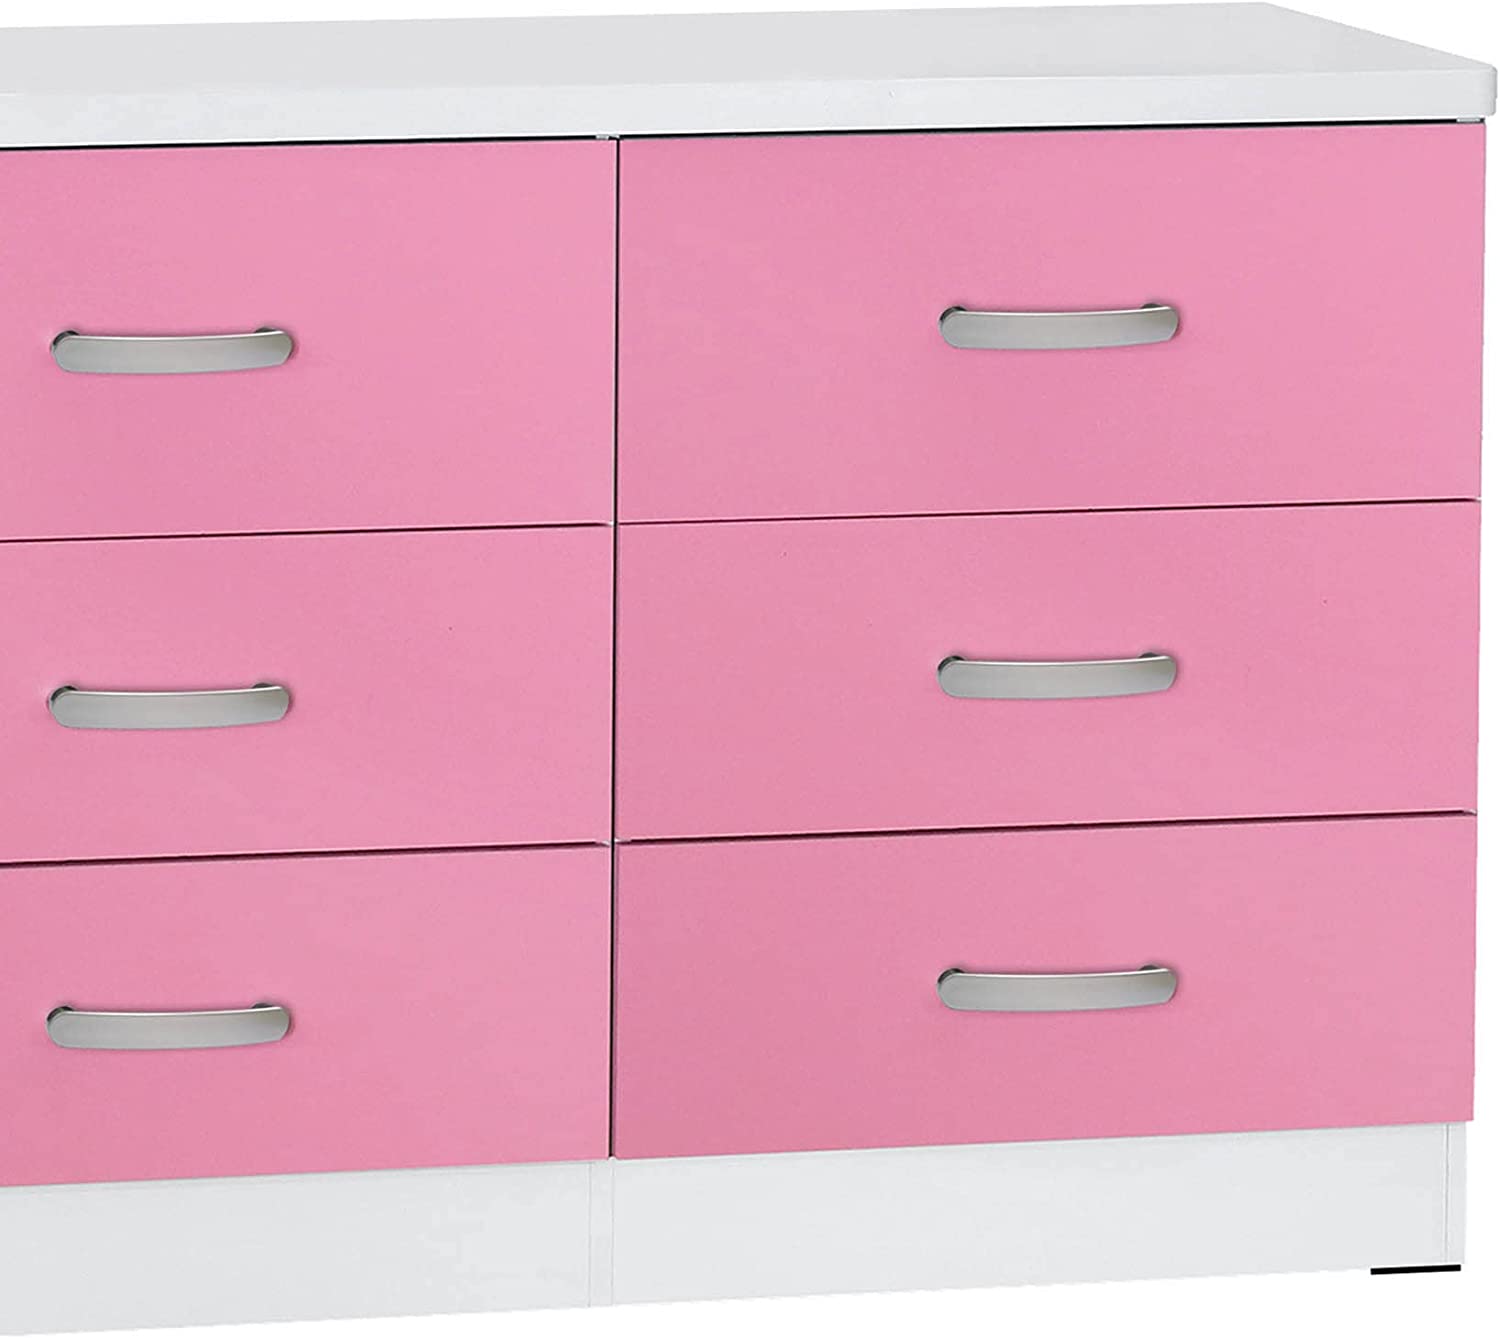 Better Home Products DD and PAM 6 Drawer Engineered Wood Dresser in White and Pink